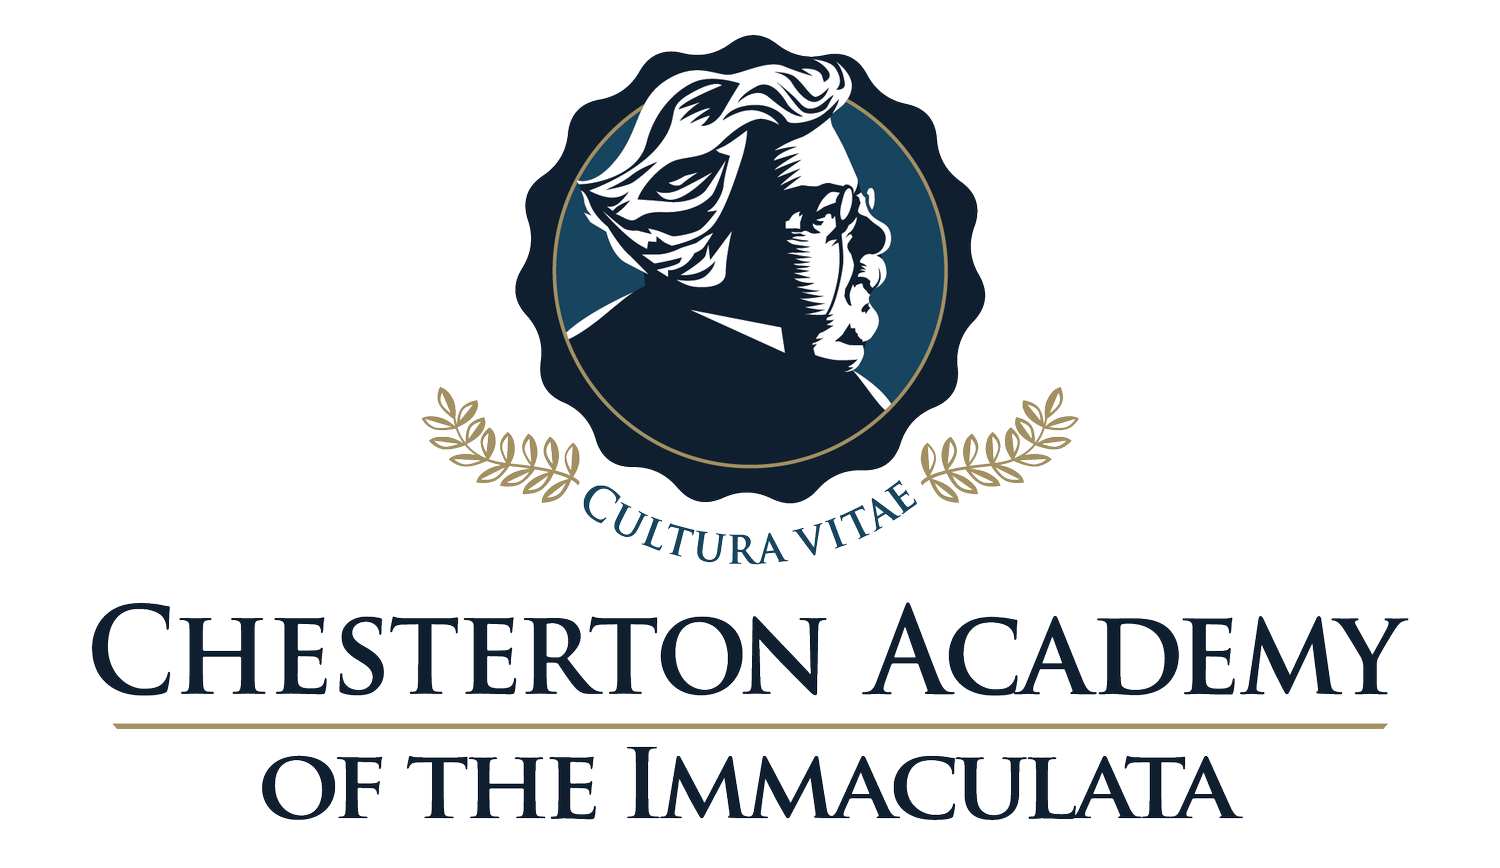 Chesterton Academy of the Immaculata